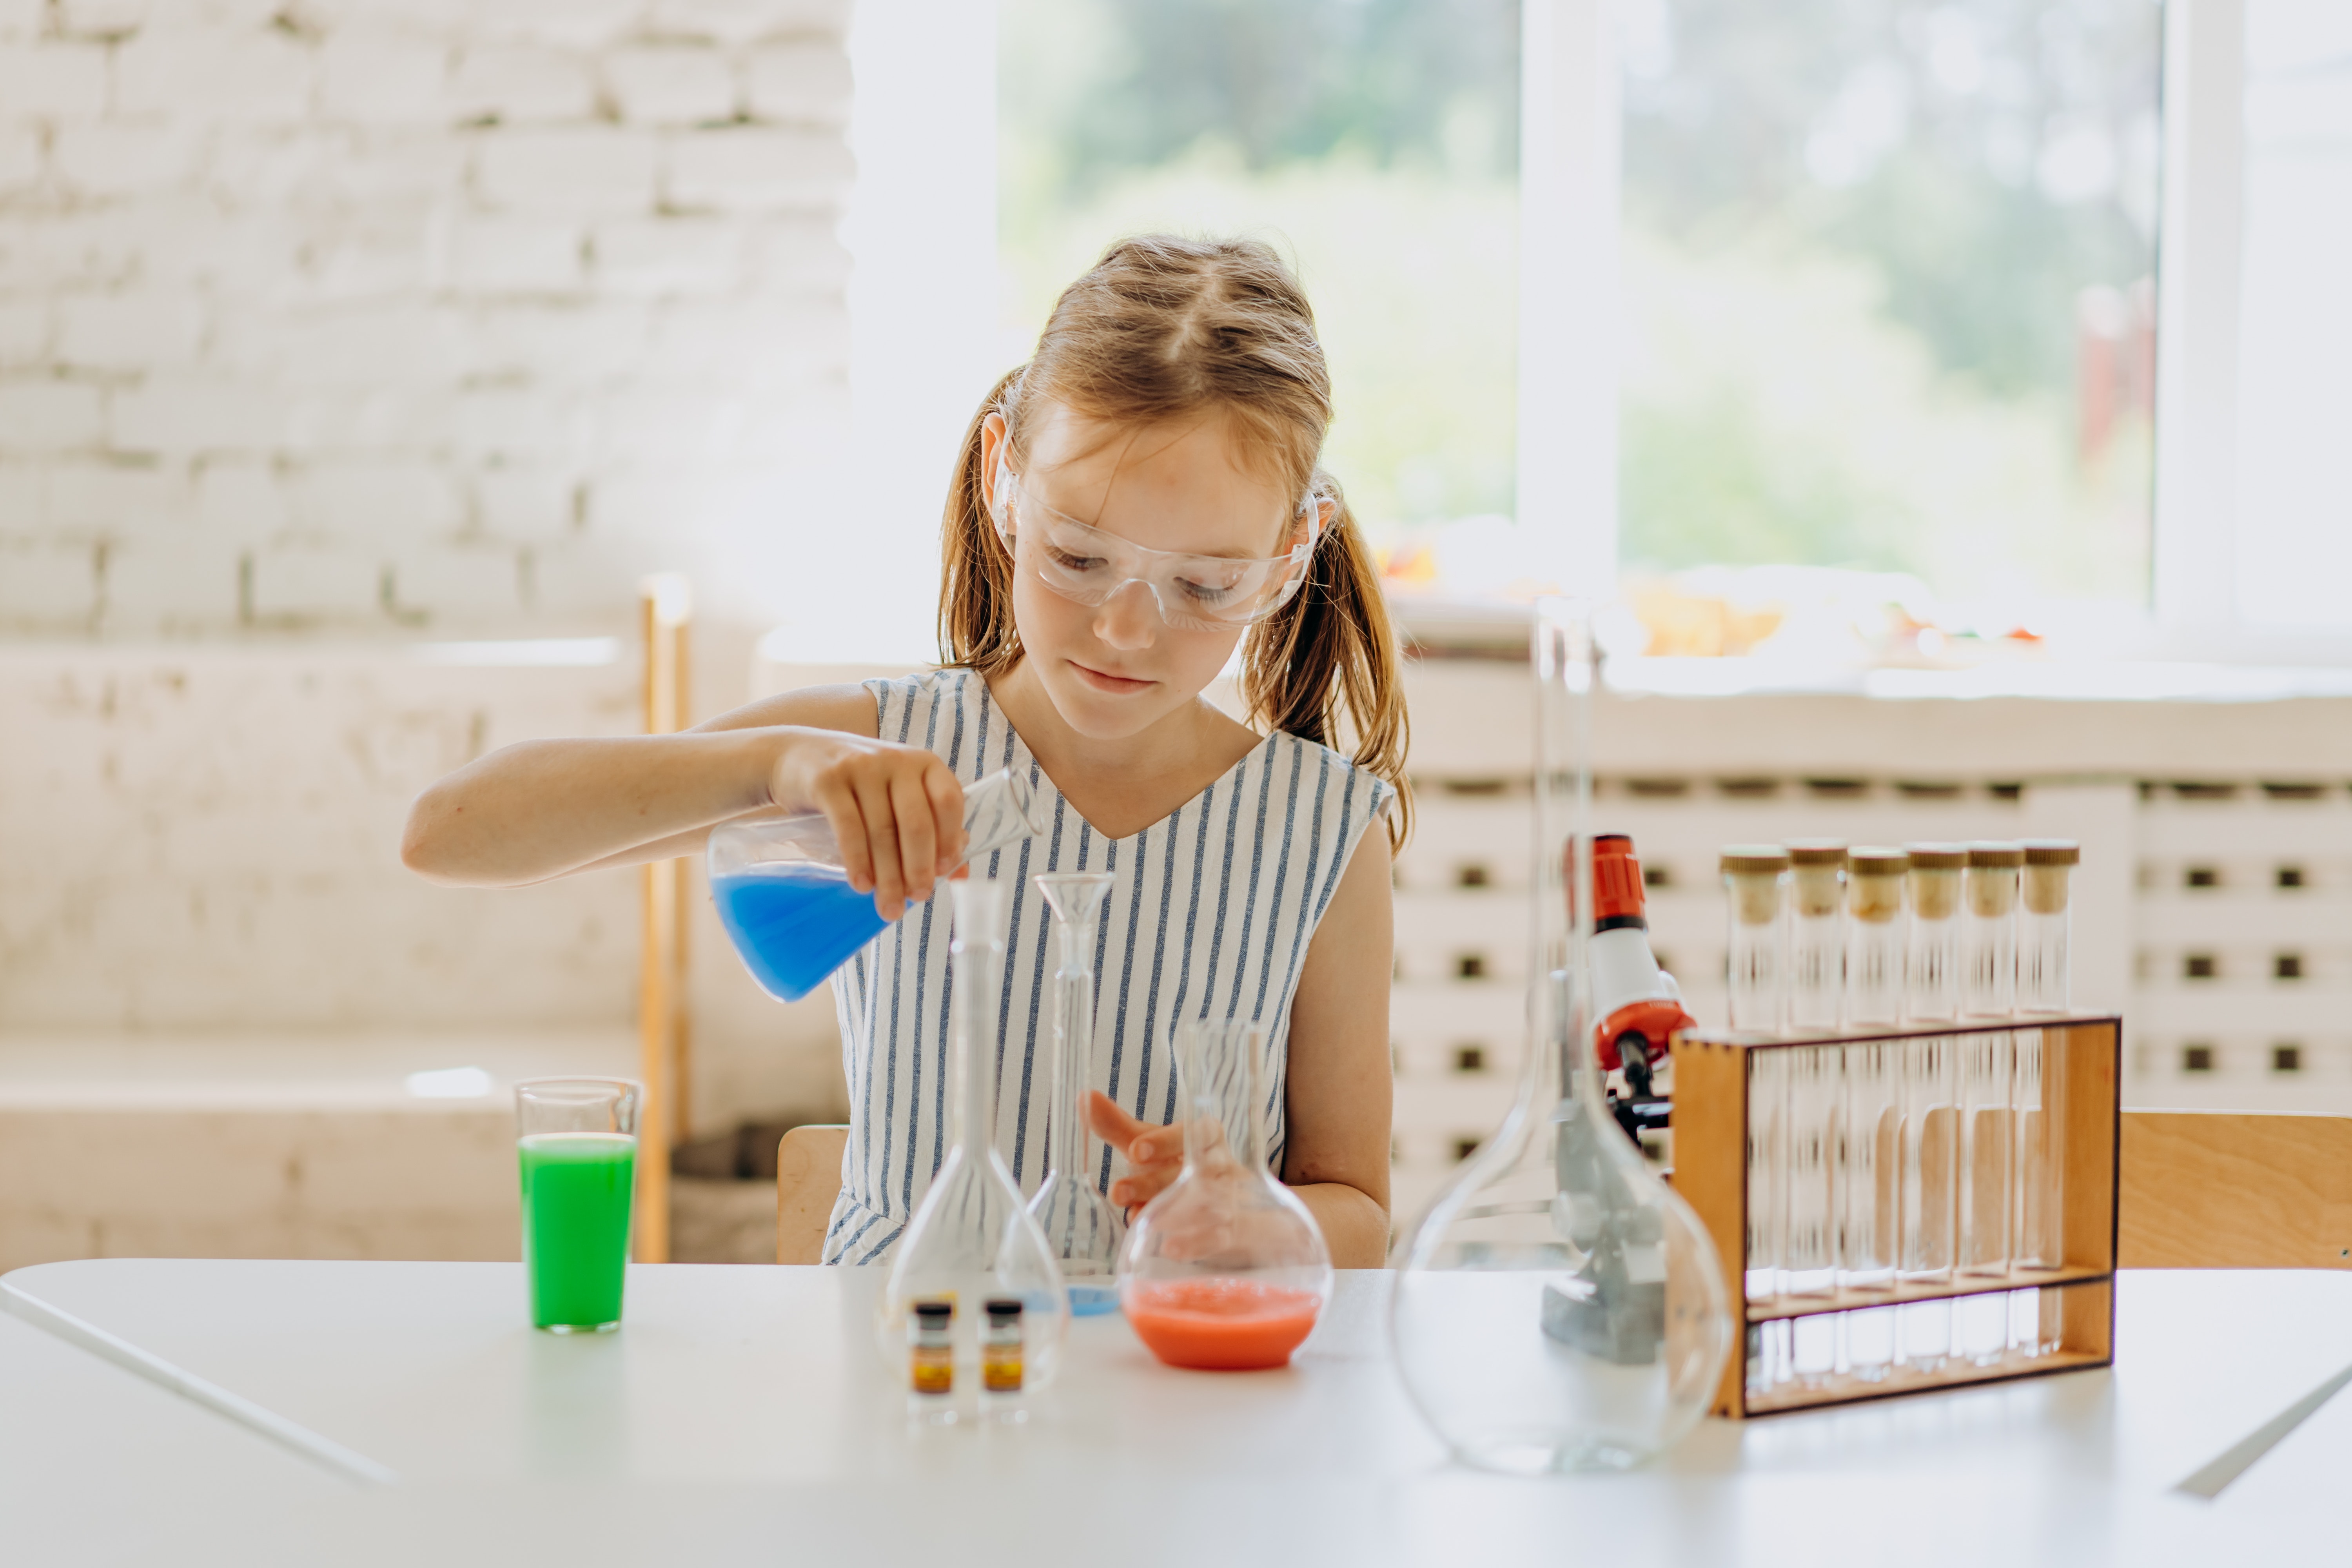 A young girl pours blue liquid from a glass beaker into another beaker on a table filled with tubes and beakers.